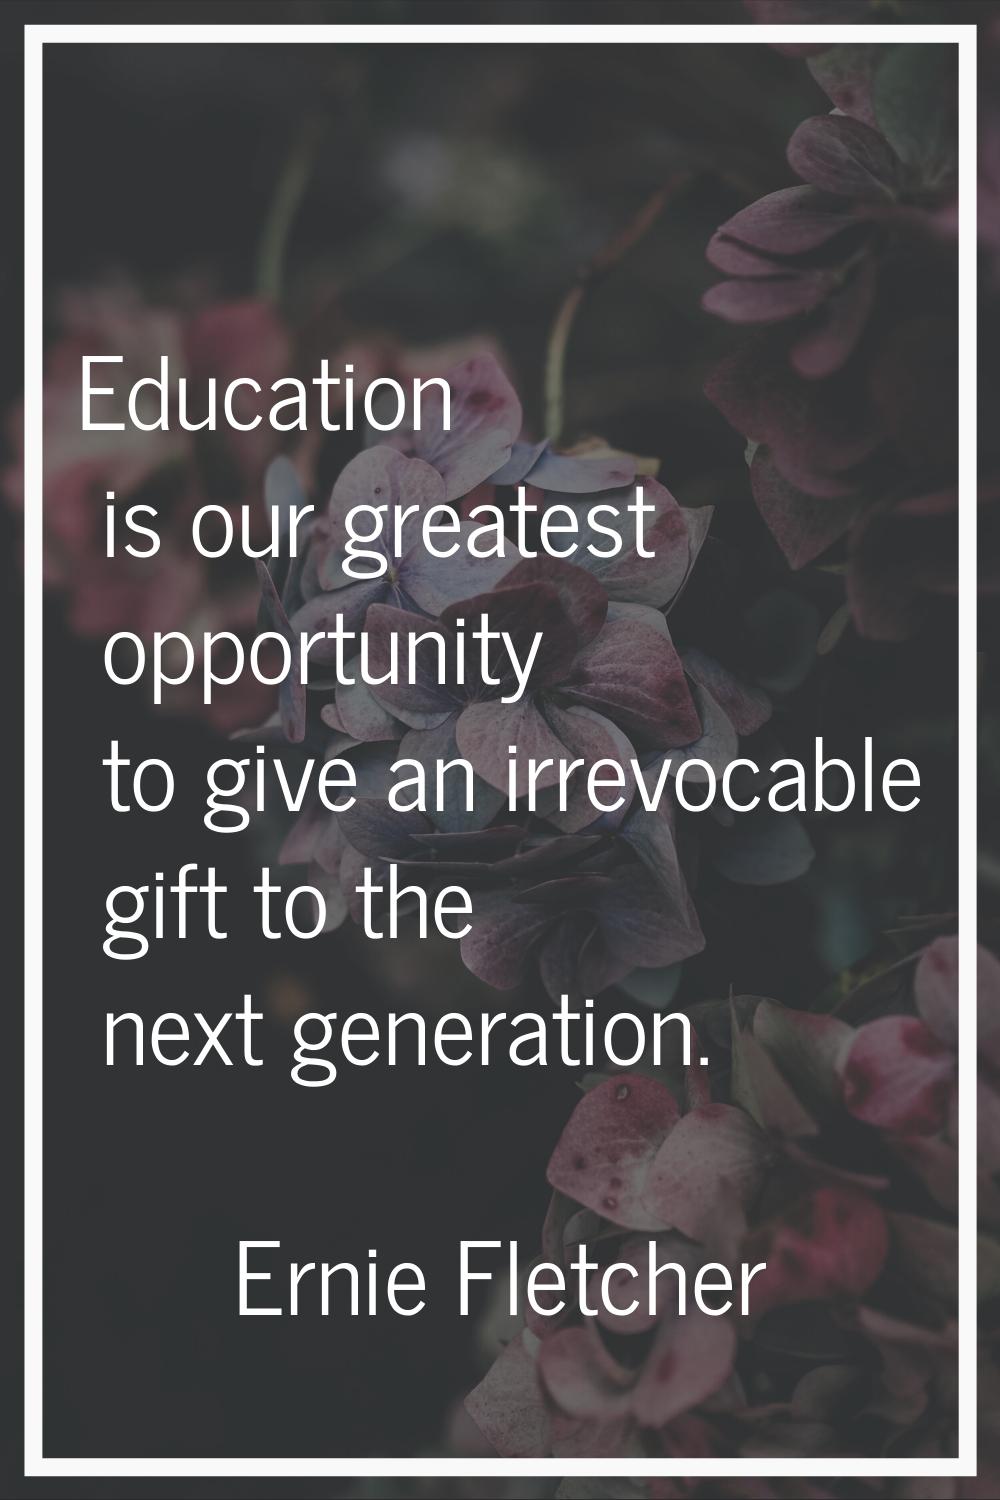 Education is our greatest opportunity to give an irrevocable gift to the next generation.